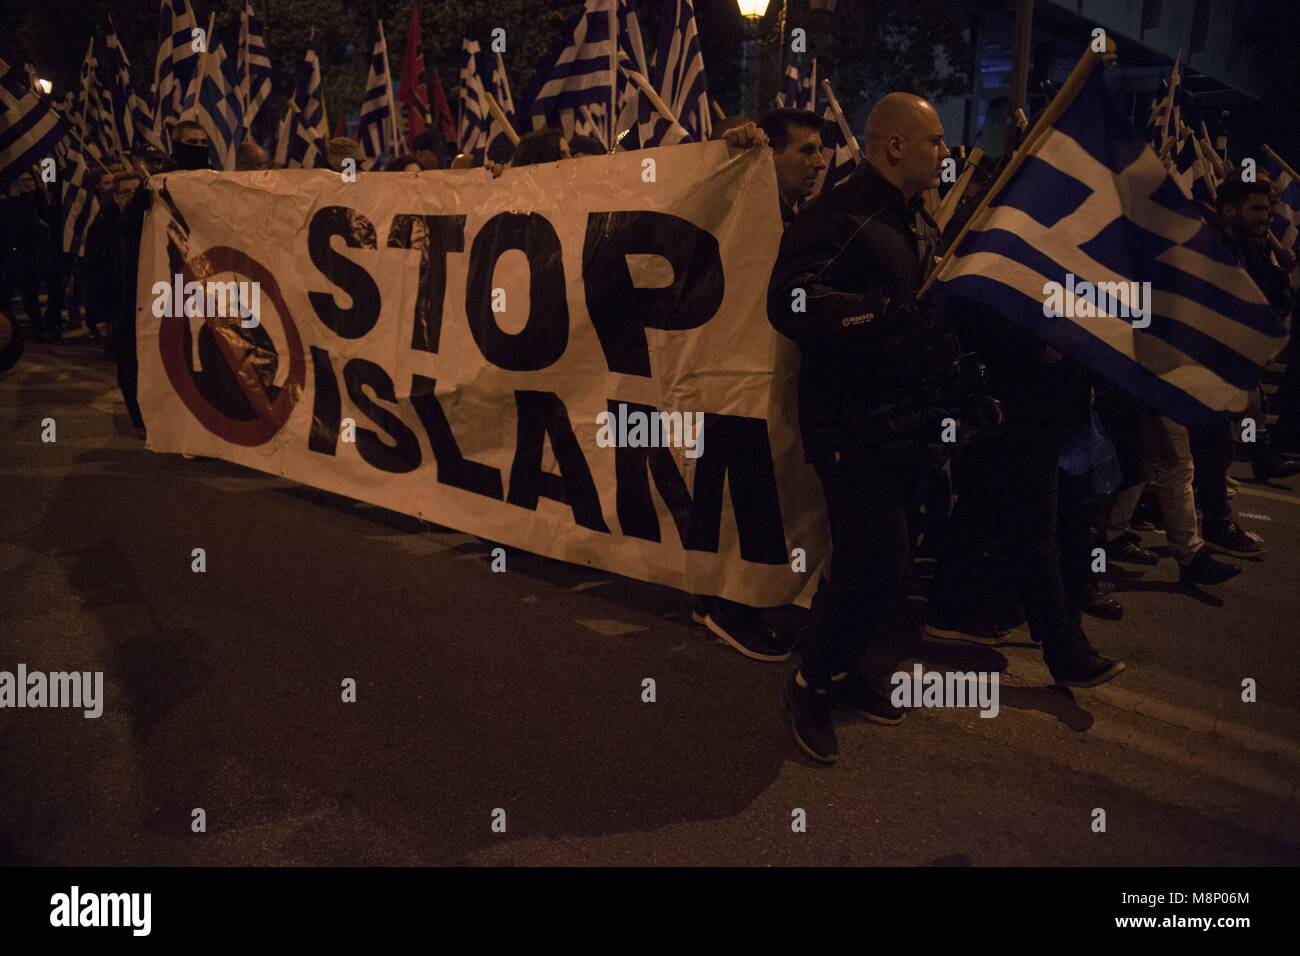 Members of Greek ultranationalist, far-right political party Chrysi Avgi (Golden Dawn) during rally in Athens, banner 'Stop Islam'. 05.03.2018 | usage worldwide Stock Photo